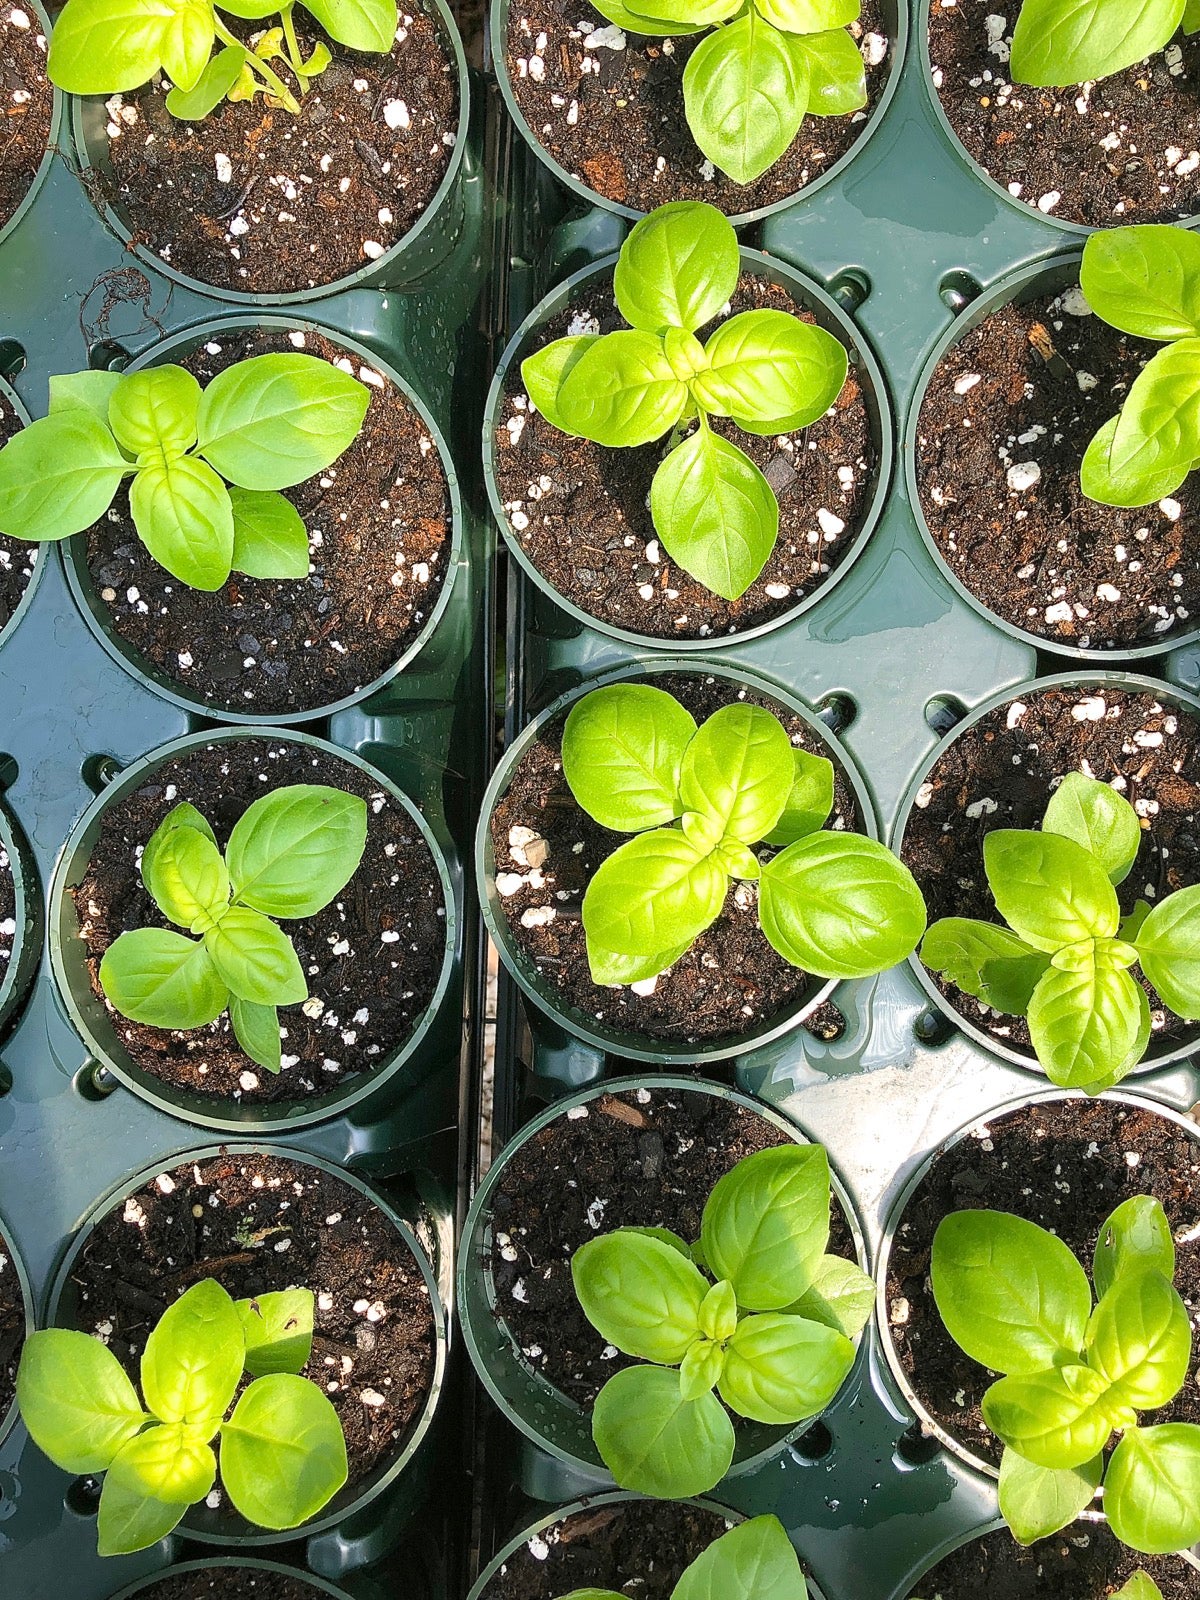 Basil seedlings in pots, ready to replant outdoors.